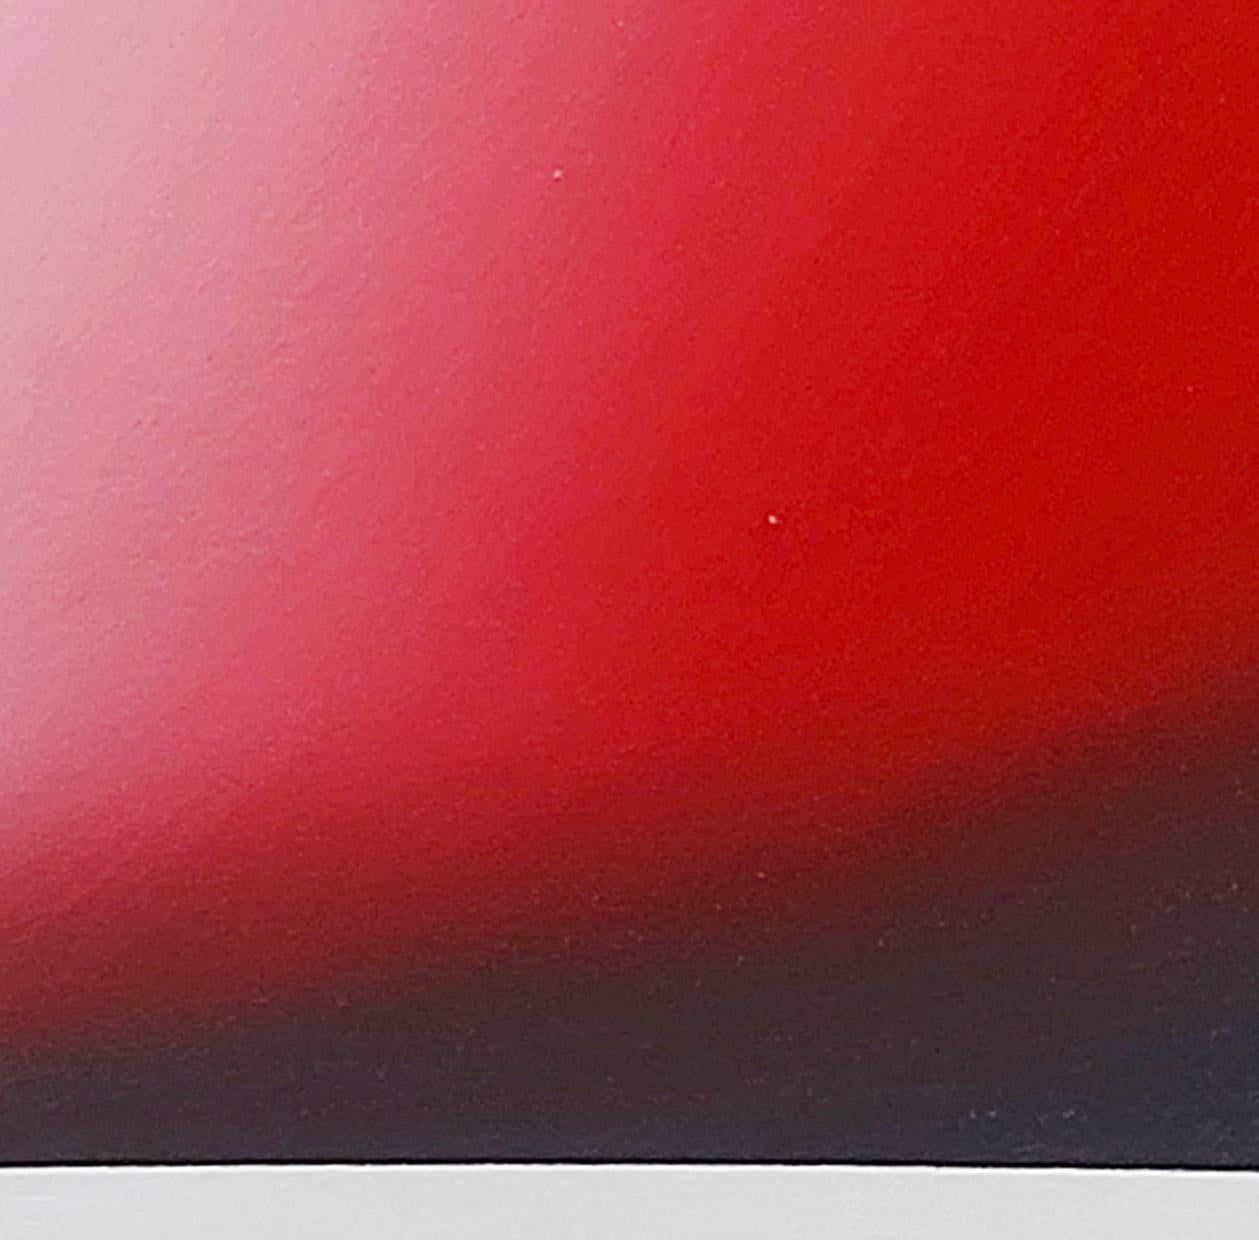 Herramienta en Rojo. From The Composition with Tools series - Abstract Painting by Jose Ricardo Contreras Gonzalez